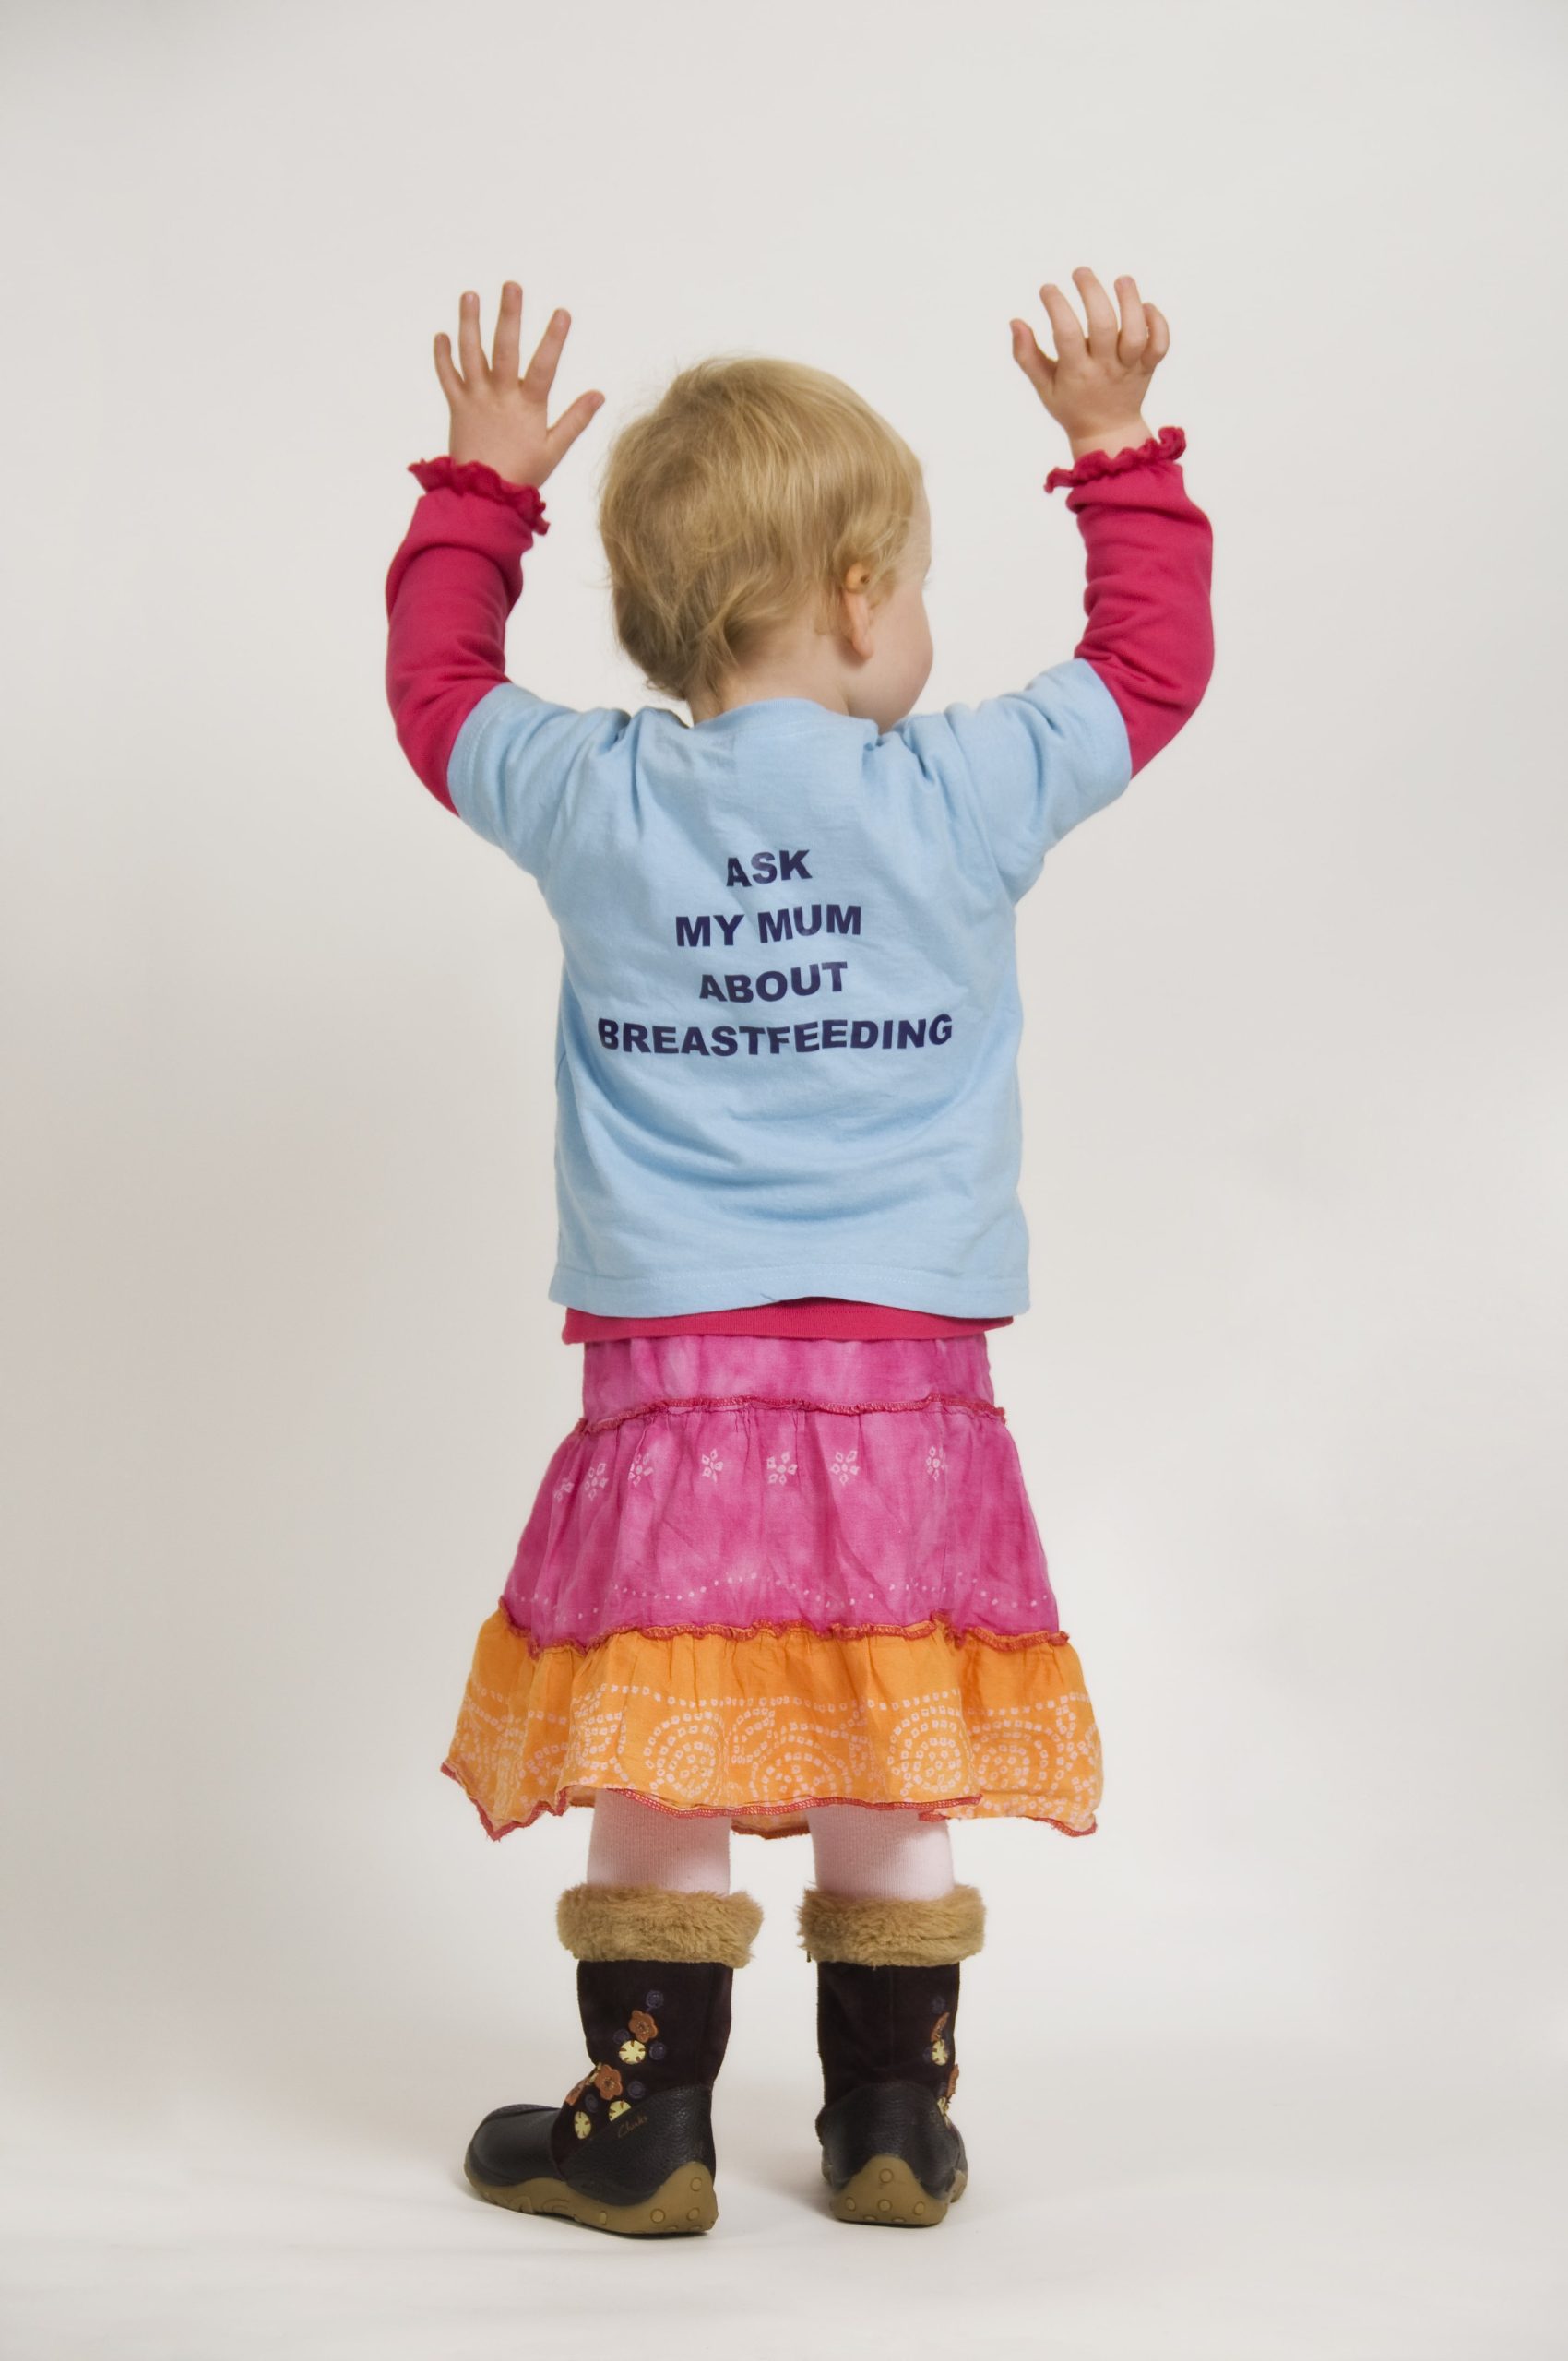 A child wearing an 'ask my mum about breastfeeding' top